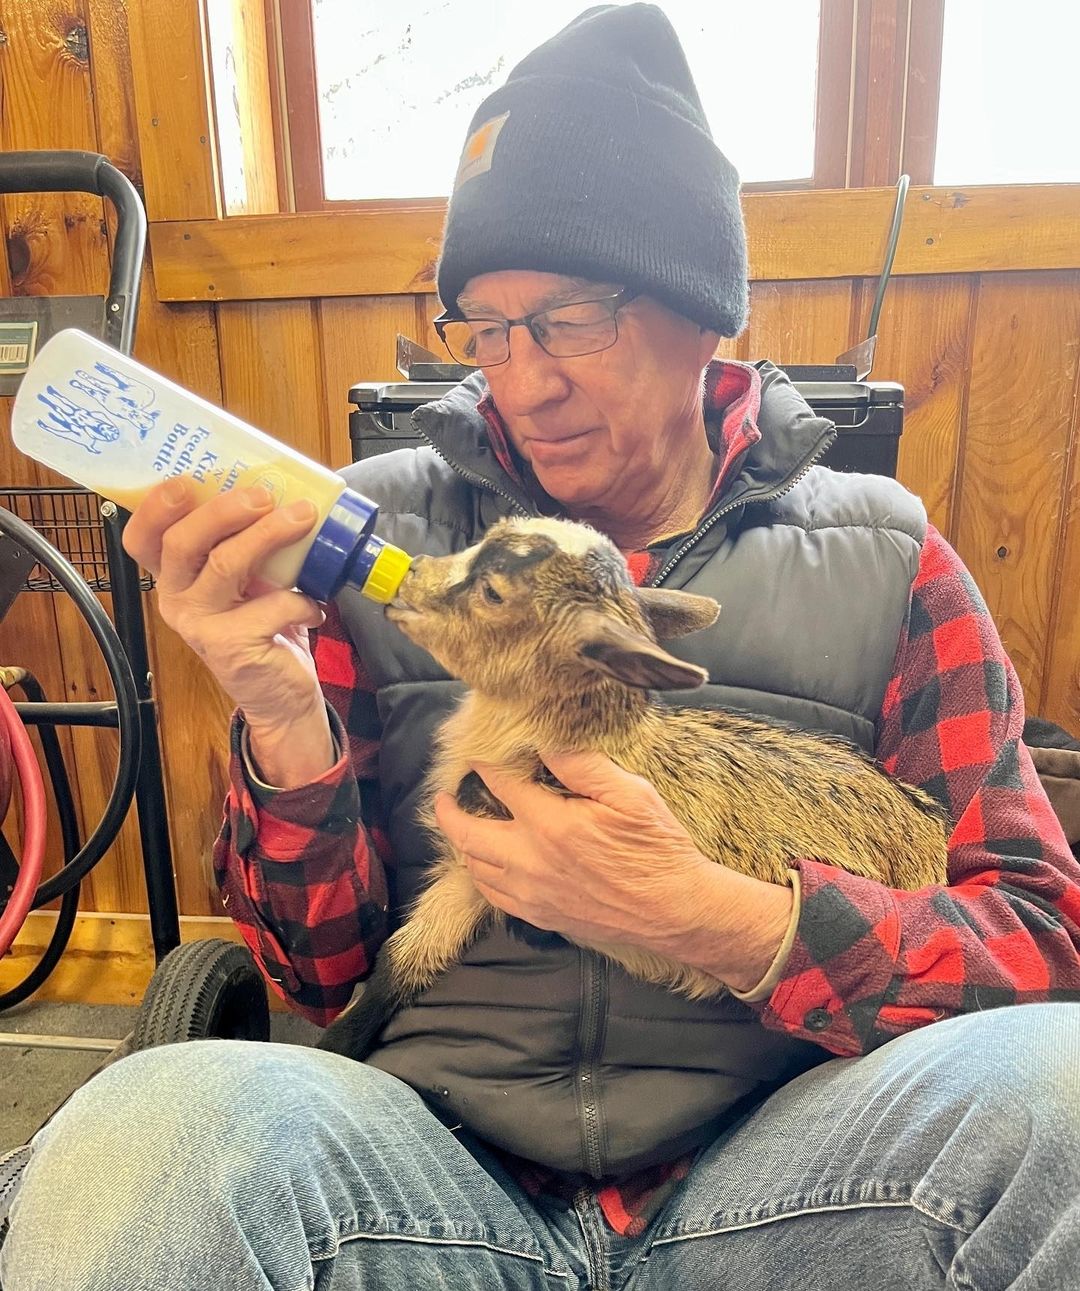 Looking for a #HVAgventures this weekend?
@nittanymeadowfarm has private goat visits and bottle feeding available Saturday and Sunday, February 26 and 27! 